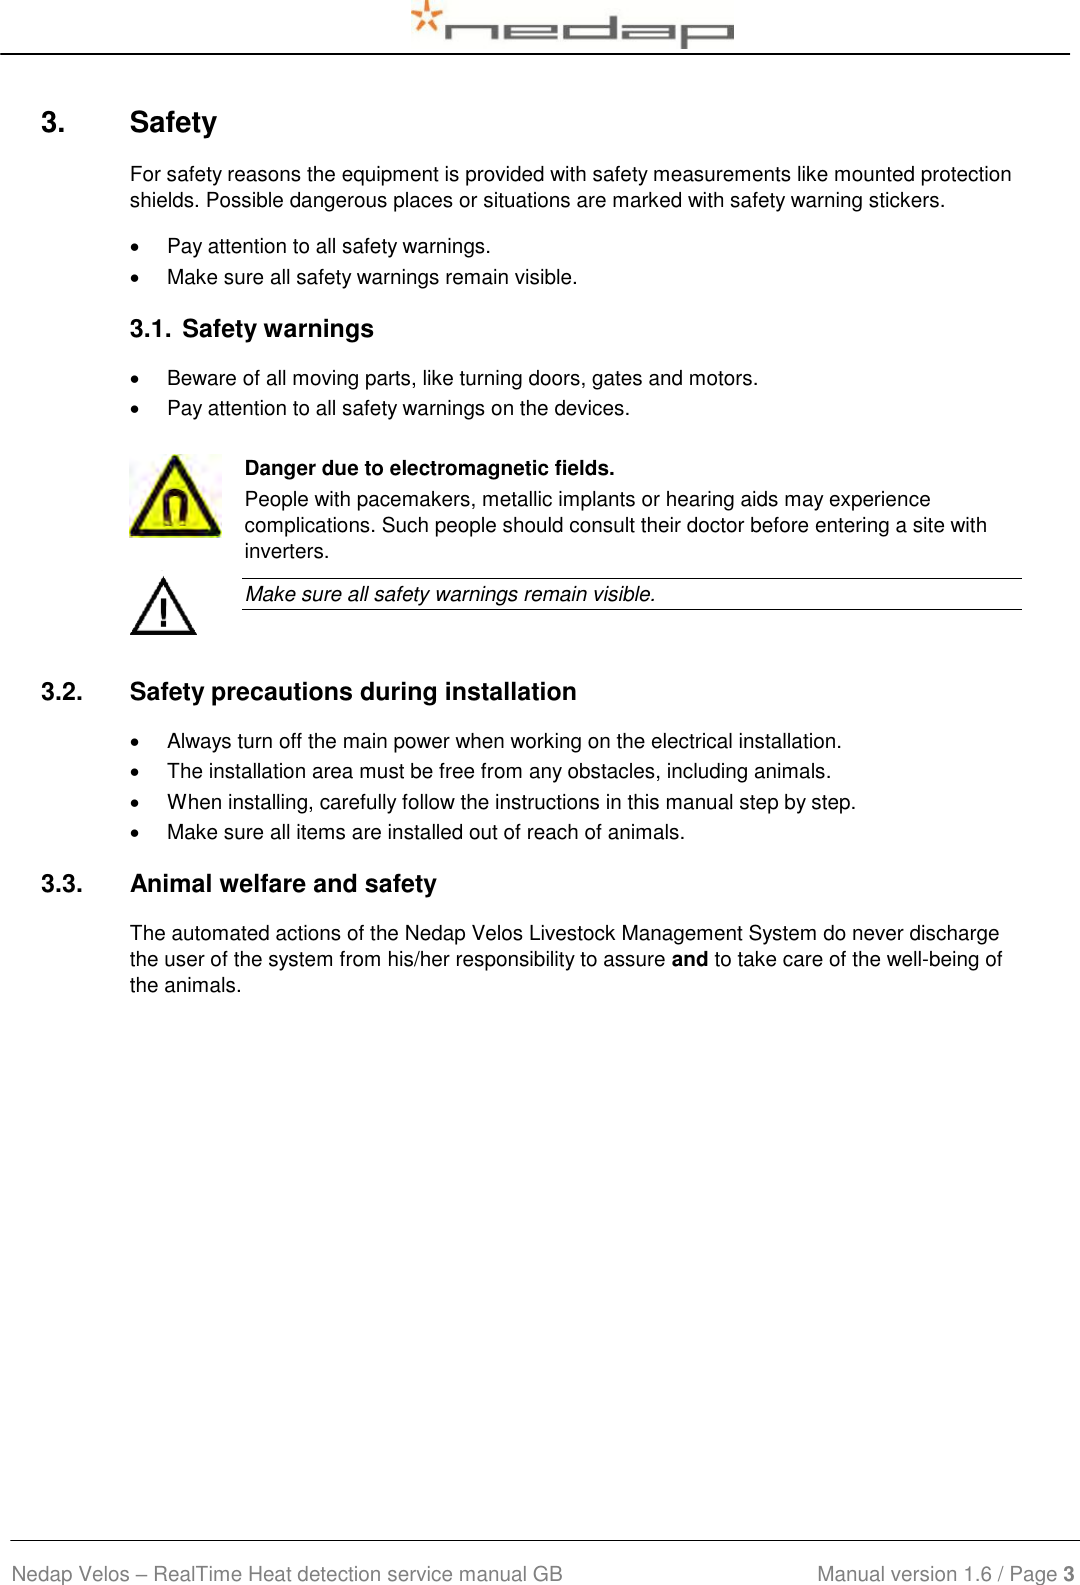  Nedap Velos – RealTime Heat detection service manual GB                            Manual version 1.6 / Page 3  3.  Safety For safety reasons the equipment is provided with safety measurements like mounted protection shields. Possible dangerous places or situations are marked with safety warning stickers.   Pay attention to all safety warnings.   Make sure all safety warnings remain visible.  3.1. Safety warnings    Beware of all moving parts, like turning doors, gates and motors.   Pay attention to all safety warnings on the devices.   Danger due to electromagnetic fields. People with pacemakers, metallic implants or hearing aids may experience complications. Such people should consult their doctor before entering a site with inverters.  Make sure all safety warnings remain visible. 3.2.  Safety precautions during installation   Always turn off the main power when working on the electrical installation.    The installation area must be free from any obstacles, including animals.   When installing, carefully follow the instructions in this manual step by step.    Make sure all items are installed out of reach of animals. 3.3.  Animal welfare and safety The automated actions of the Nedap Velos Livestock Management System do never discharge the user of the system from his/her responsibility to assure and to take care of the well-being of the animals.  